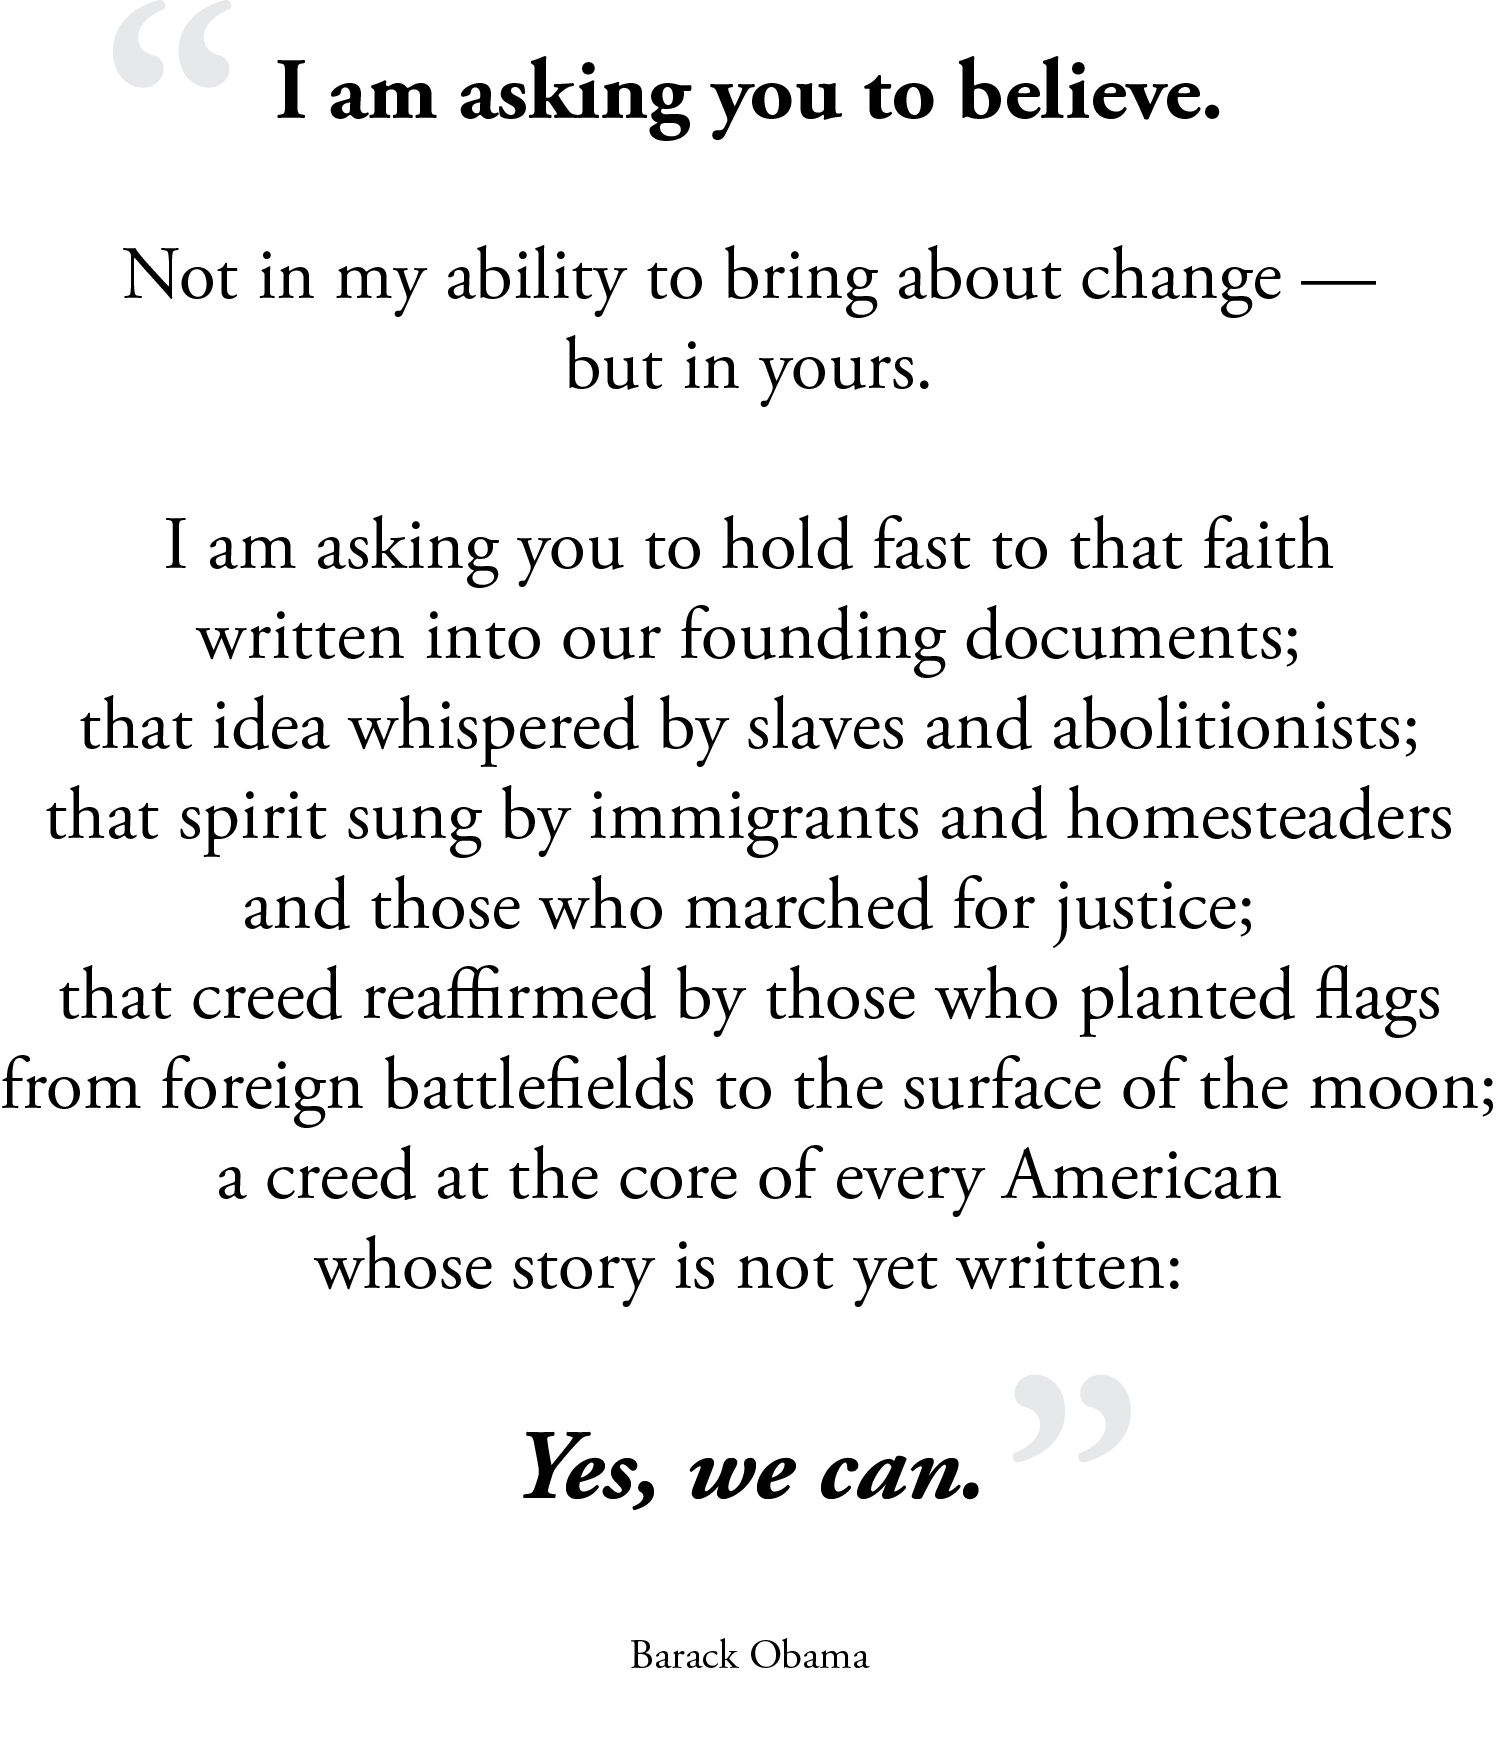 I am asking you to believe. Not in my ability to bring about change — but in yours. I am asking you to hold fast to that faith written into our founding documents; that idea whispered by slaves and abolitionists; that spirit sung by immigrants and homesteaders and those who marched for justice; that creed reaffirmed by those who planted flags from foreign battlefields to the surface of the moon; a creed at the core of every American whose story is not yet written: Yes, we can. -Barack Obama